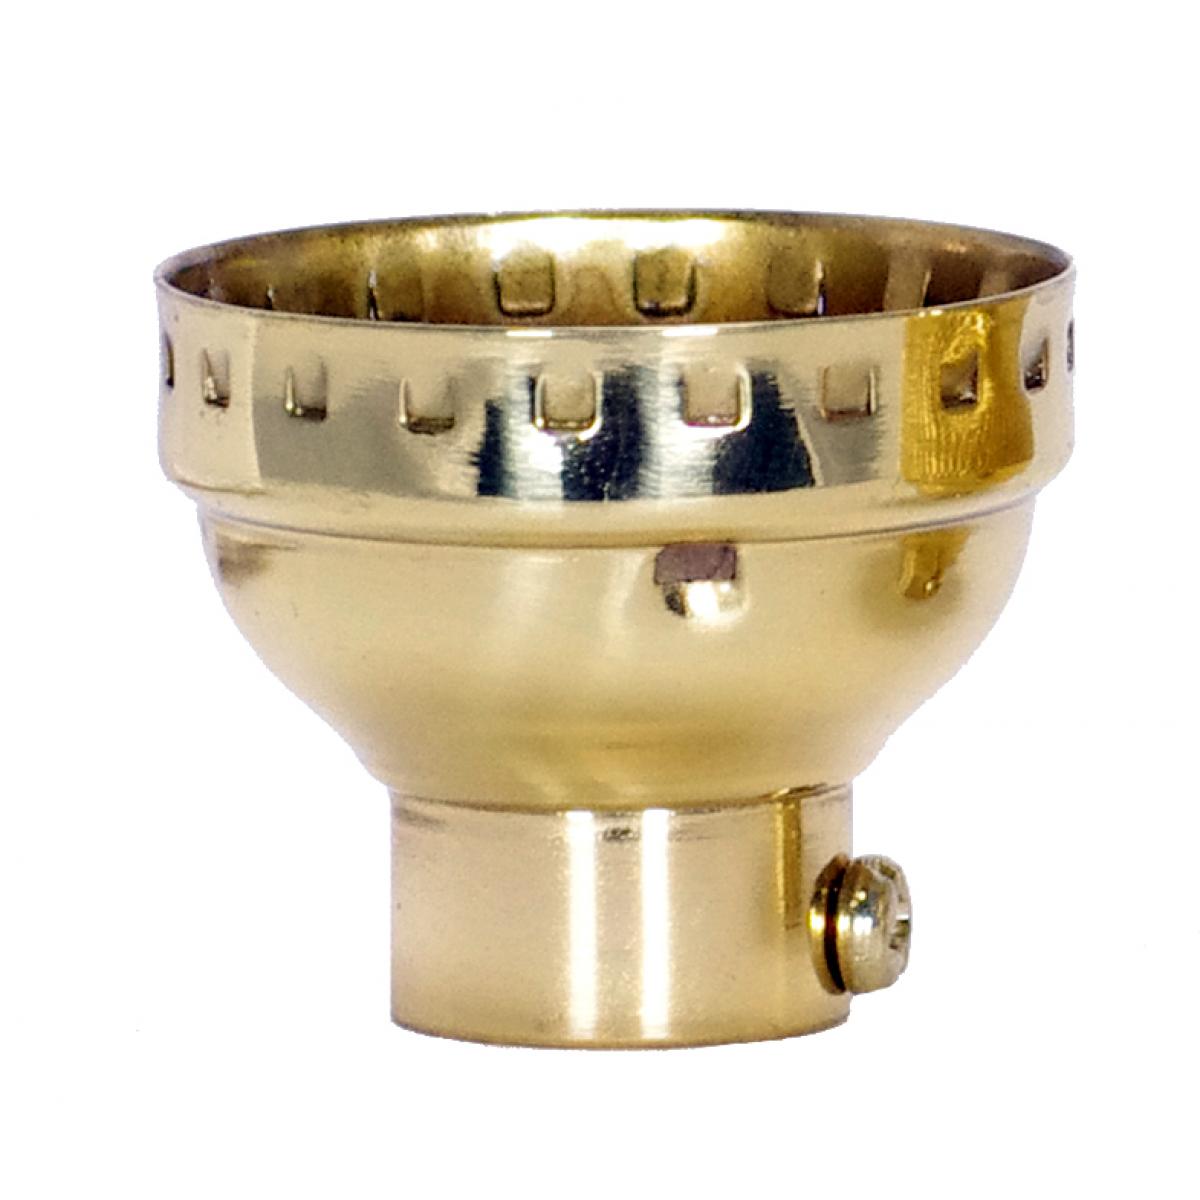 Satco 80-1289 3 Piece Solid Brass Cap With Paper Liner Polished Brass Finish 1/4 IP With Set Screw